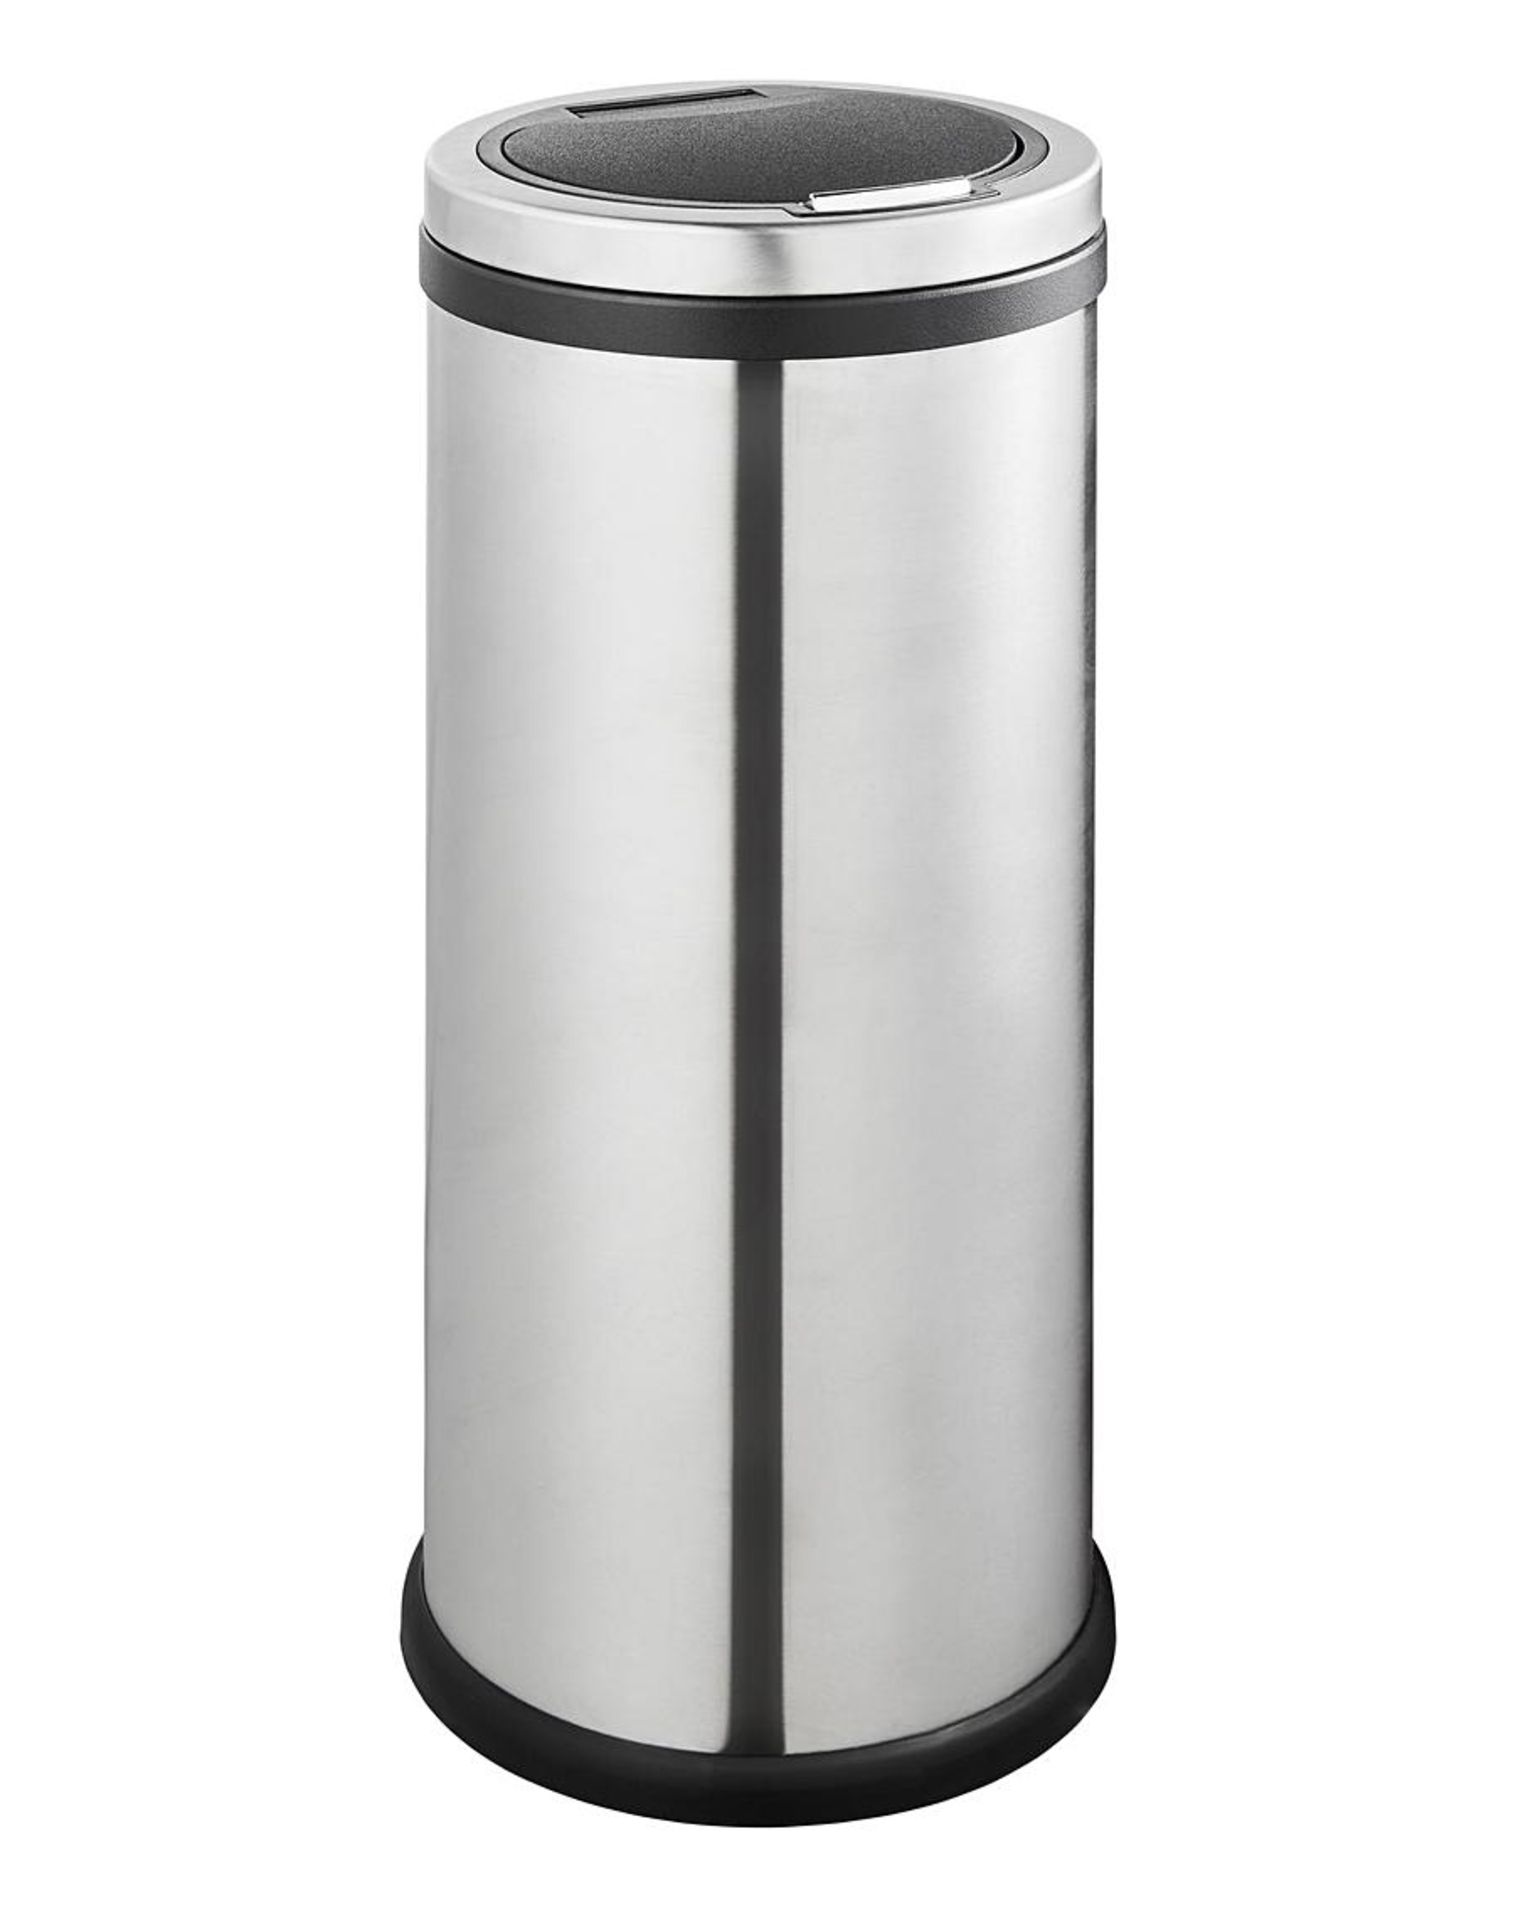 30 Litre Stainless Steel Press Touch Bin. - SR6. Designed with a special soft-touch closure for